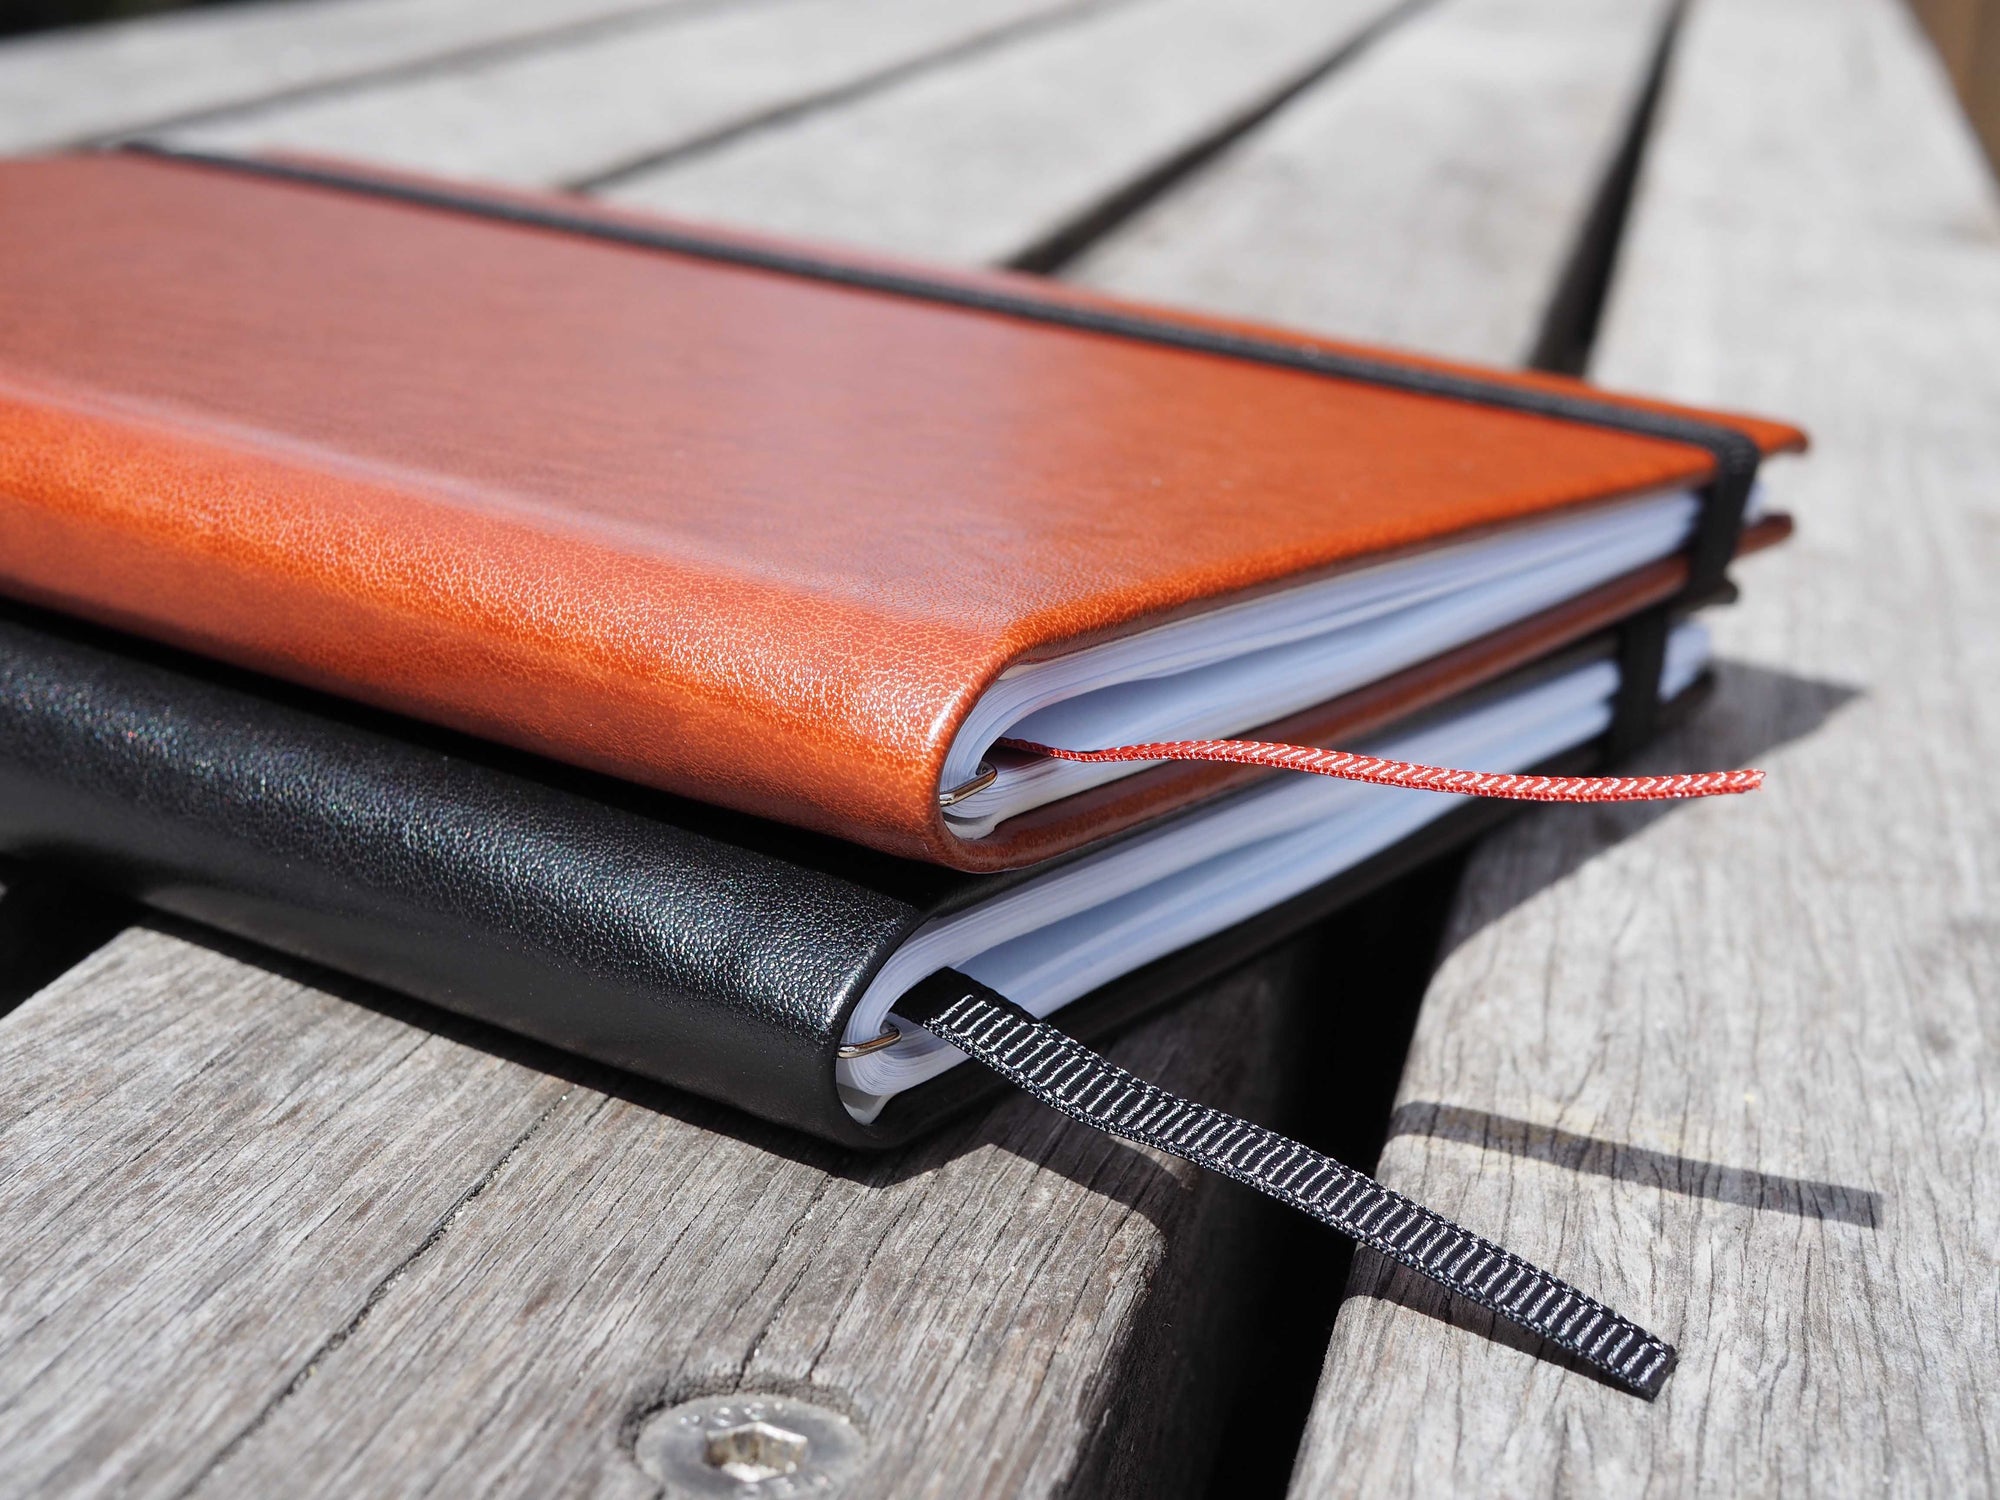 The Paper Saver Eco Friendly Reusable Notebook reduces your paper waste by upcycling your paper as pages so you can write your notes and ideas sustainably. Environmentally friendly, zero waste, waste free living.